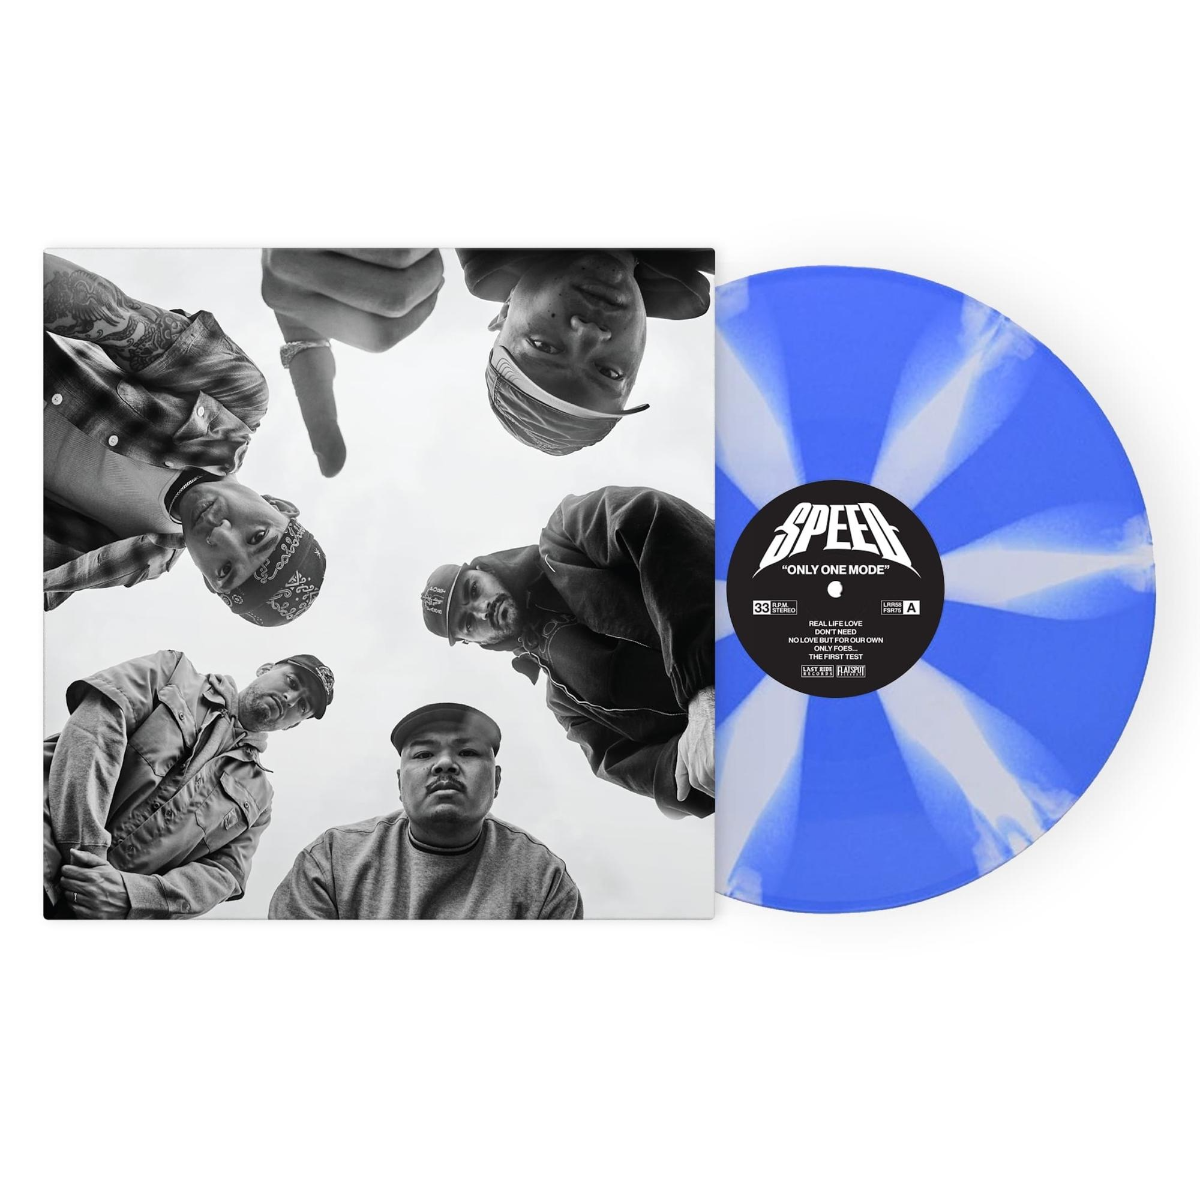 Speed | Only One Mode (Indie Exclusive, Colored Vinyl, Blue, White) | Vinyl